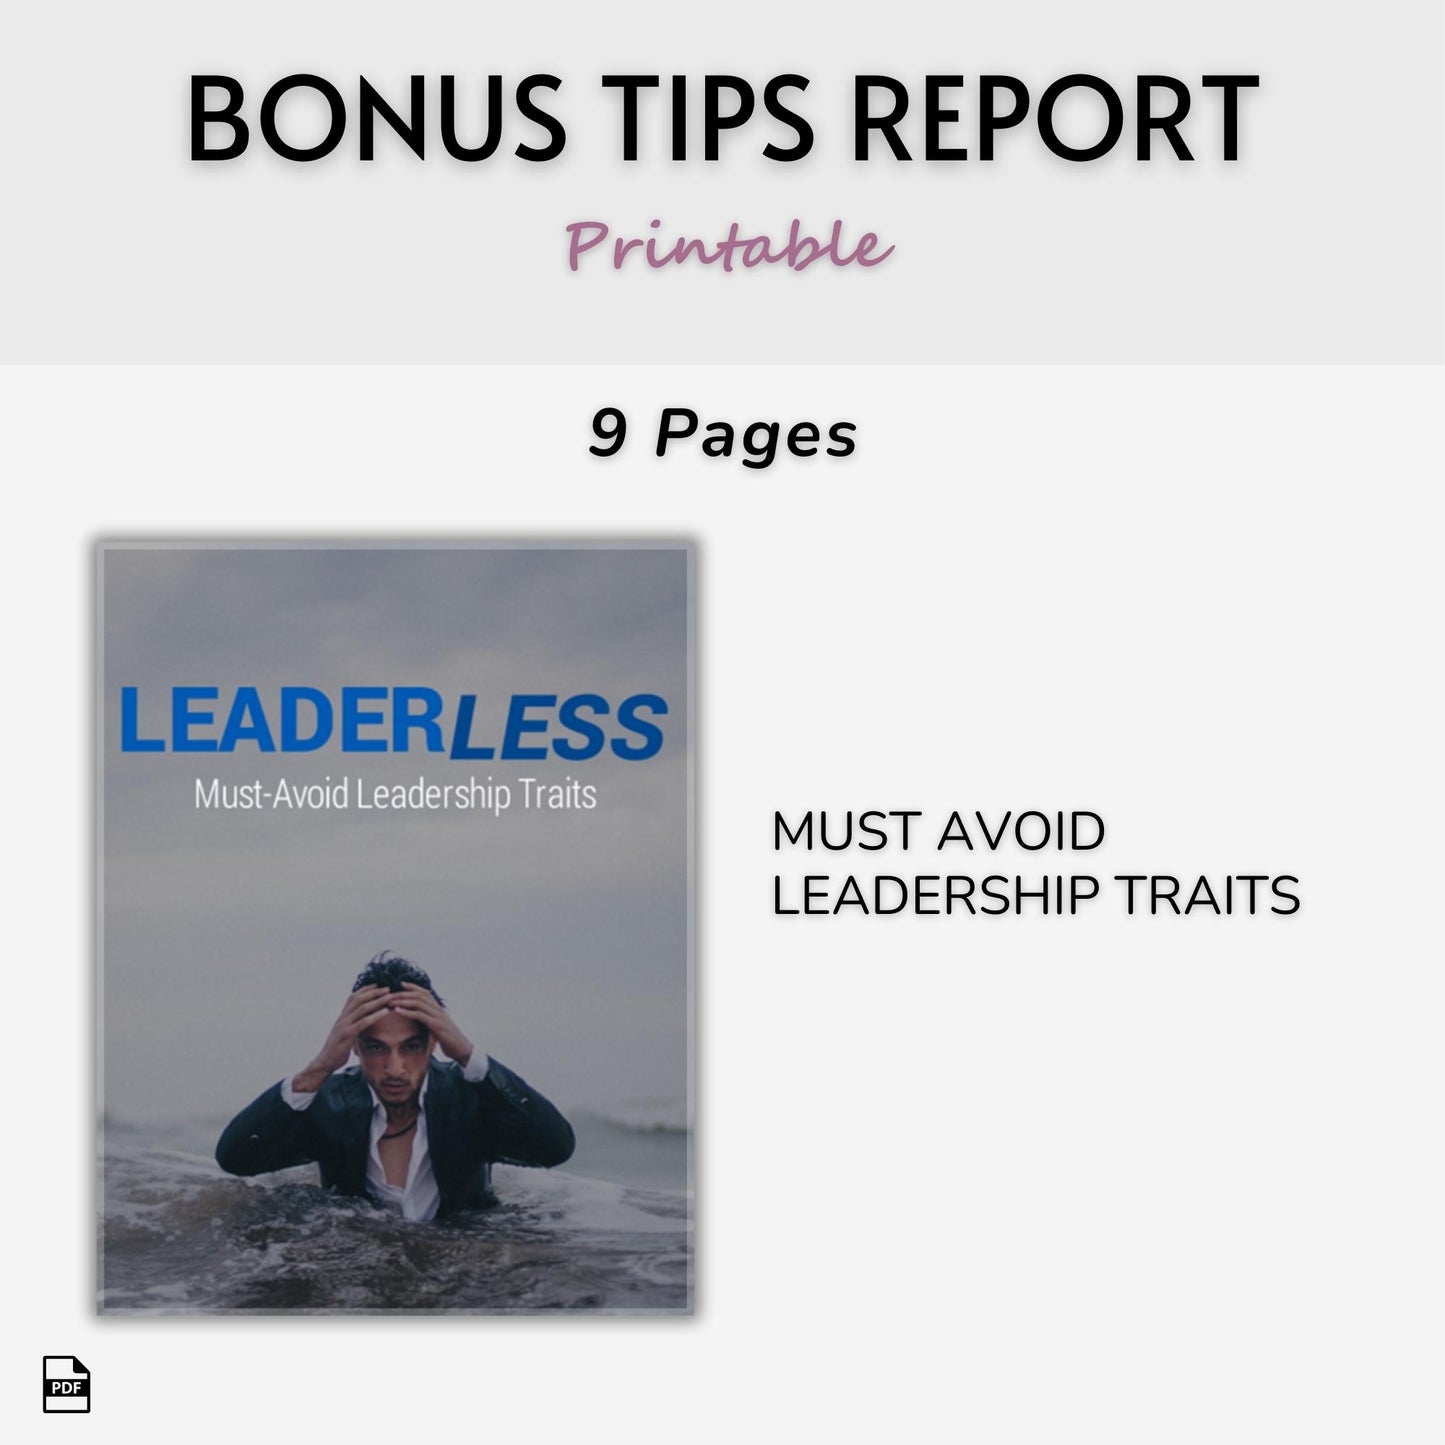 Everyday Leadership: Change Your Everyday Life With Leadership Traits